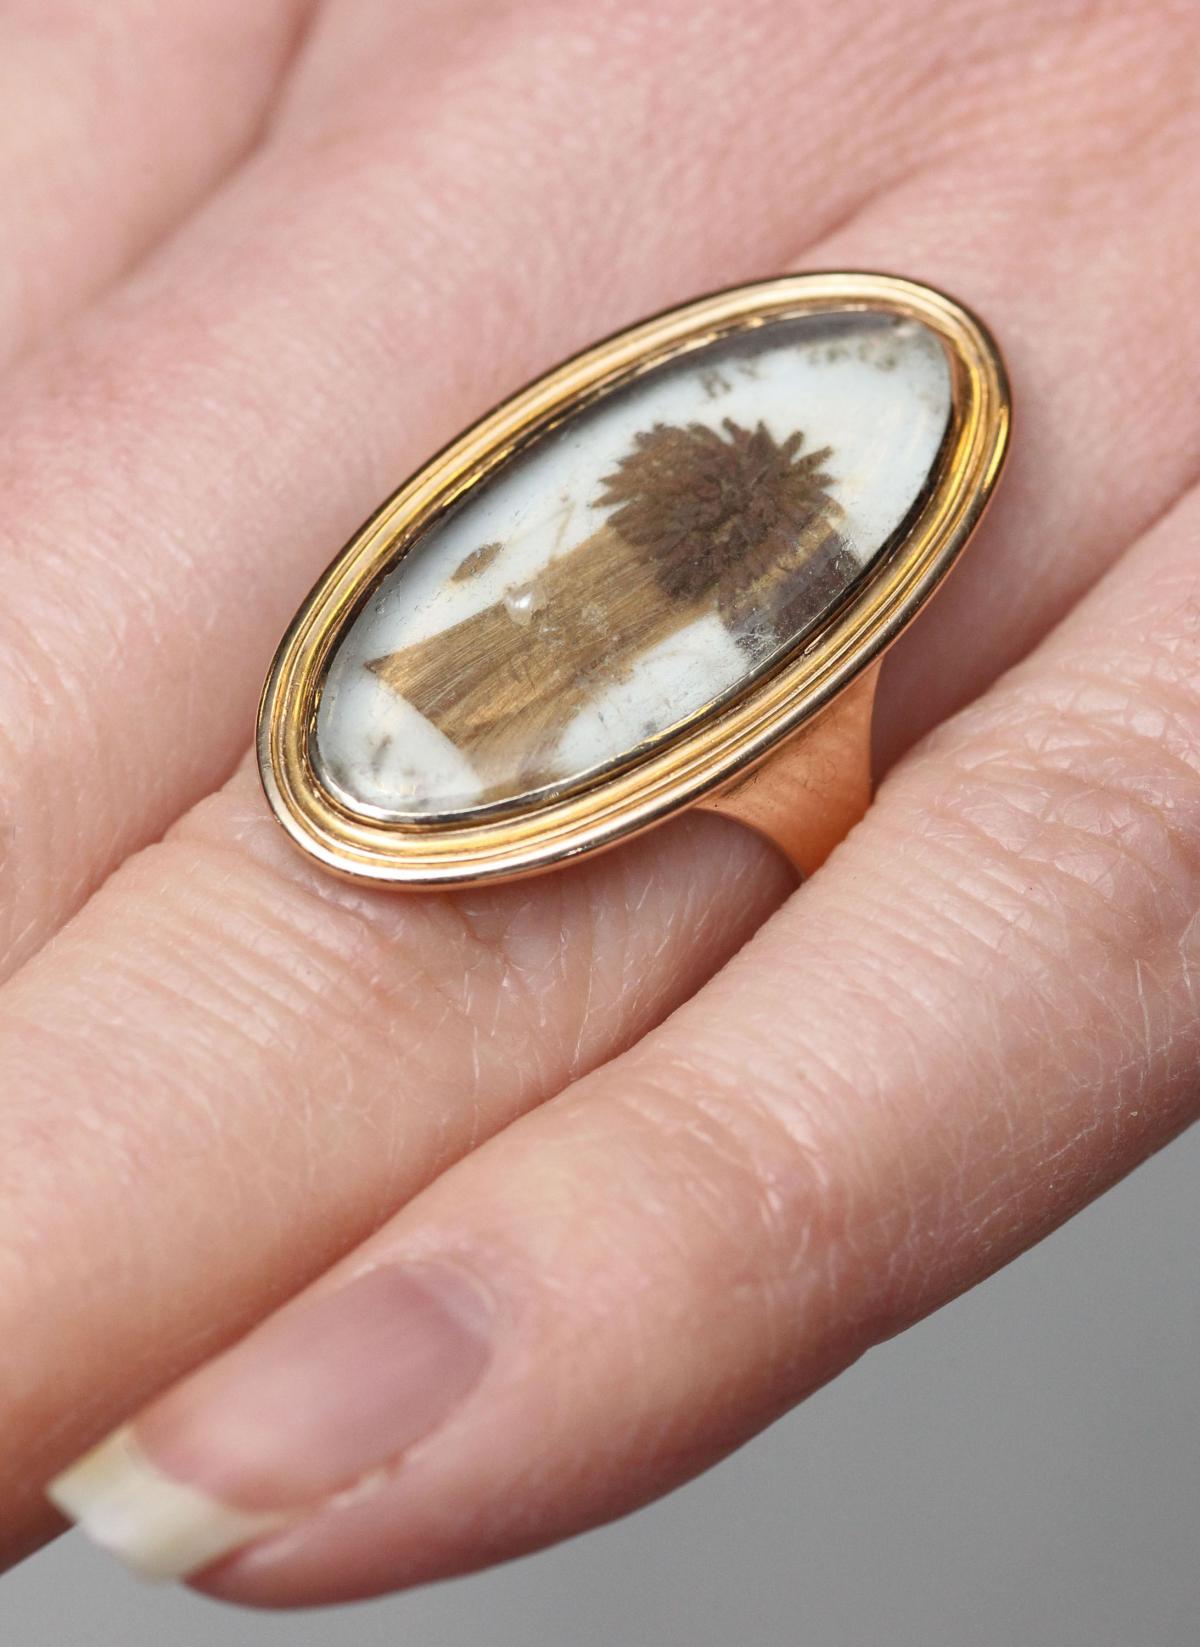 Ring with lock of hair from Bonnie Prince Charlie set for auction debut |  HeraldScotland